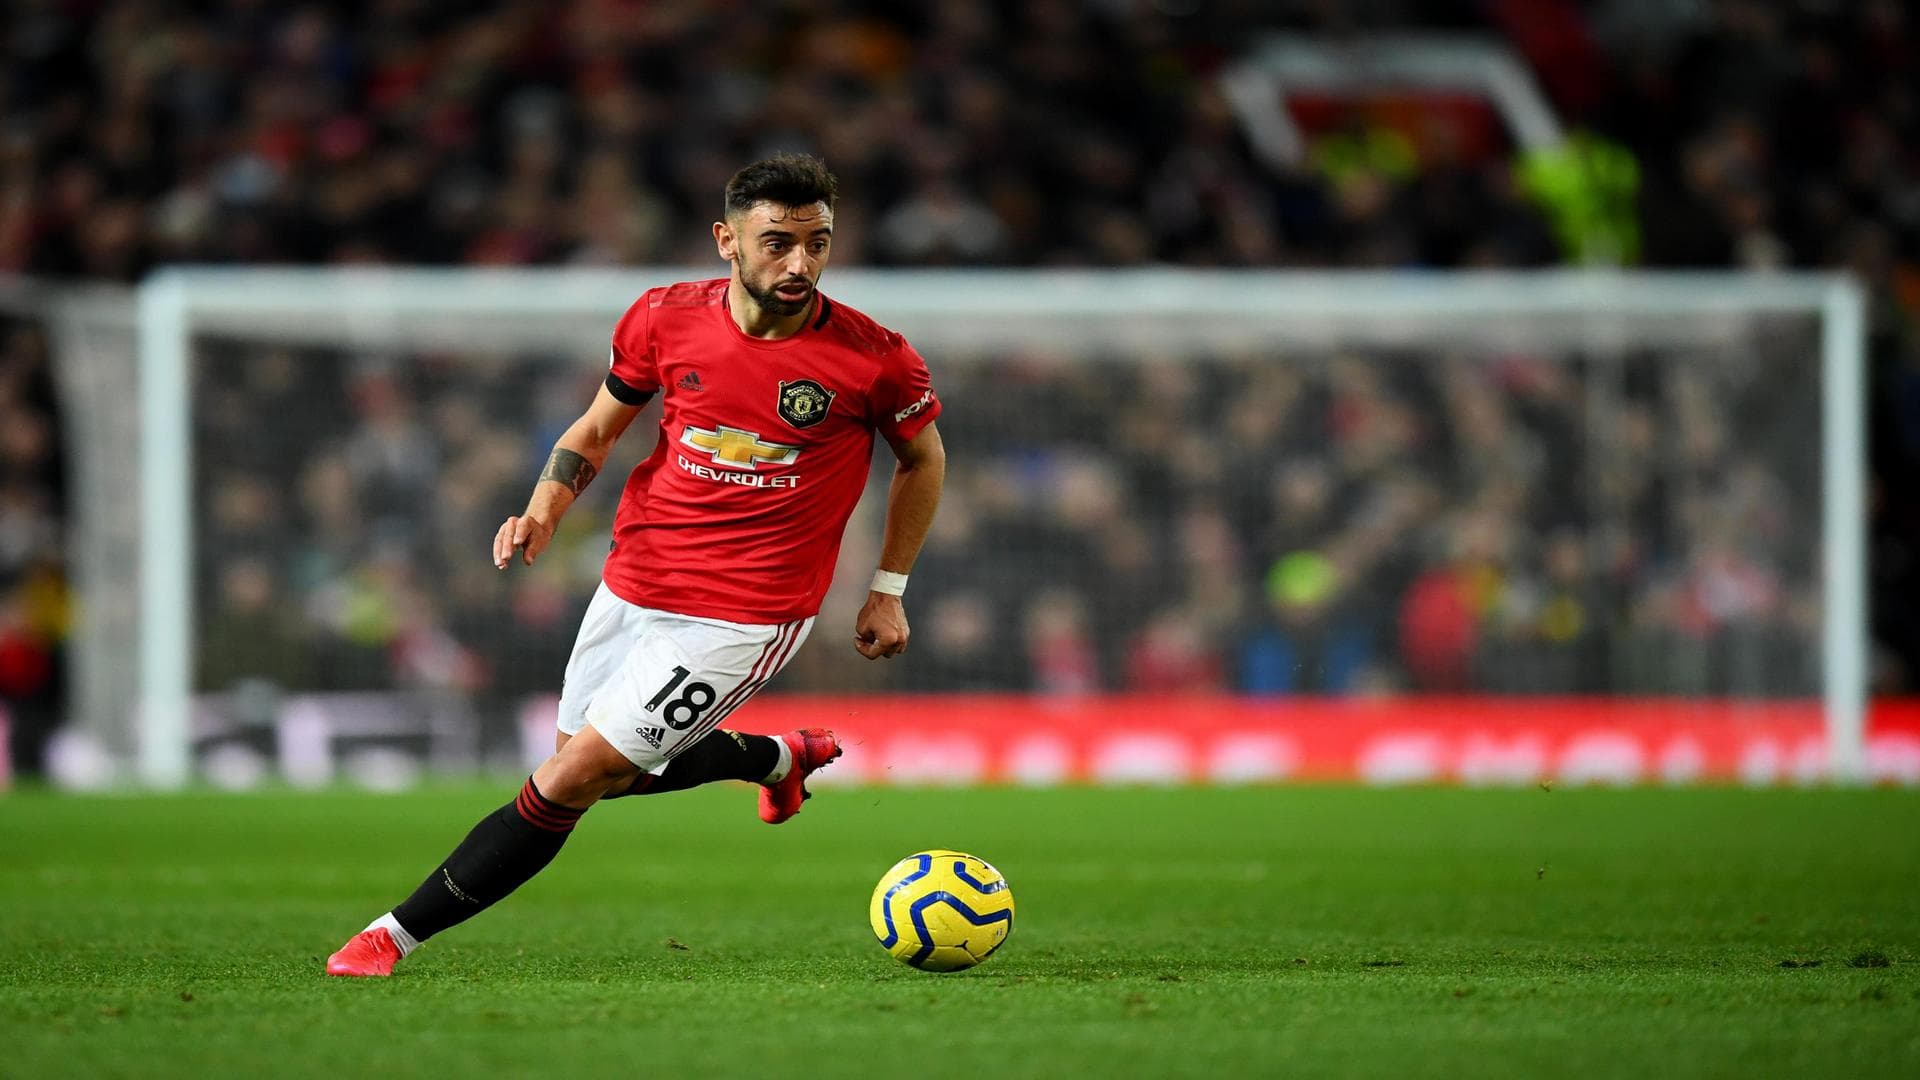 Bruno Fernandes - The 10 best attacking midfielders in the world right now